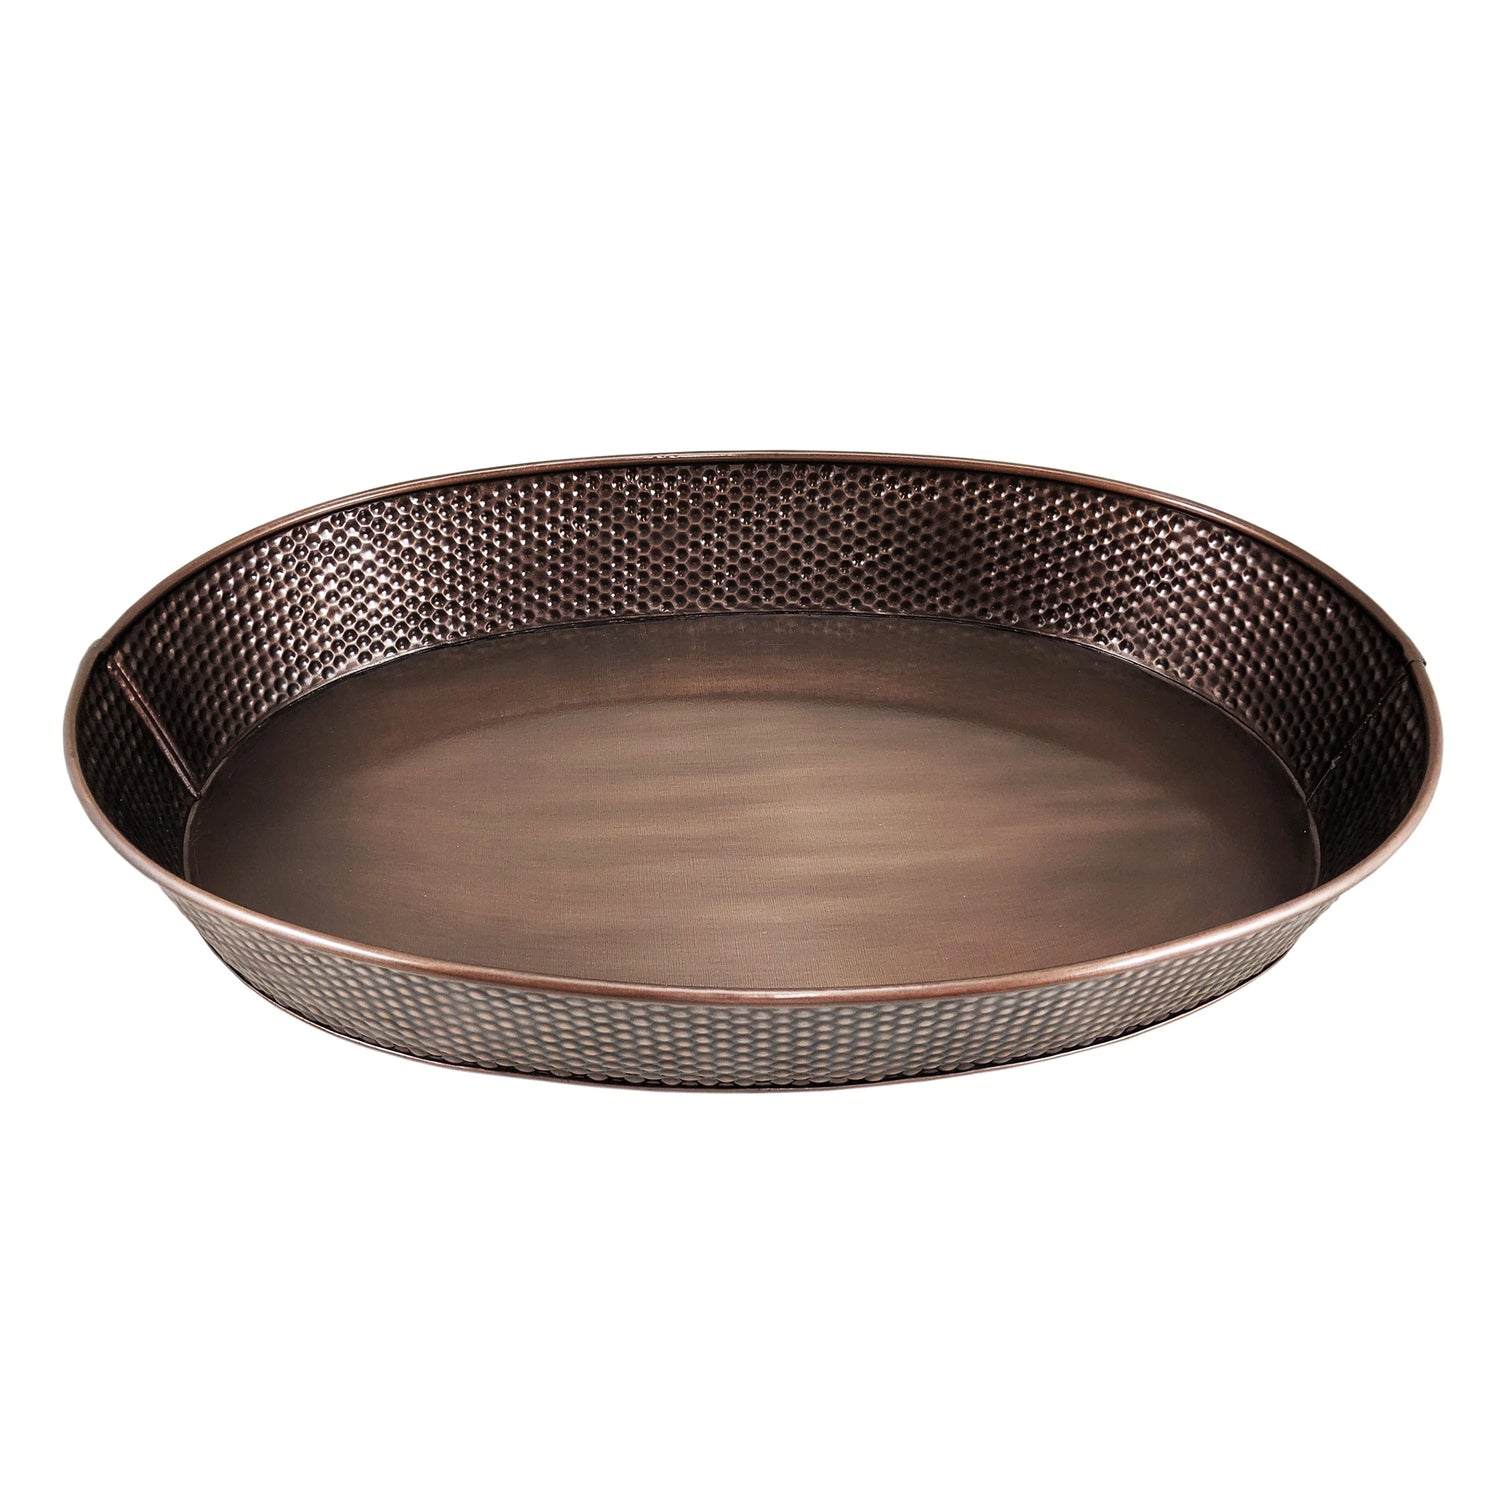 Metal tray for serving snacks and drinks at a party.  Made of metal with copper color and hammered finish.  Use in the kitchen, bar, dining room, or patio to serve your party guests.